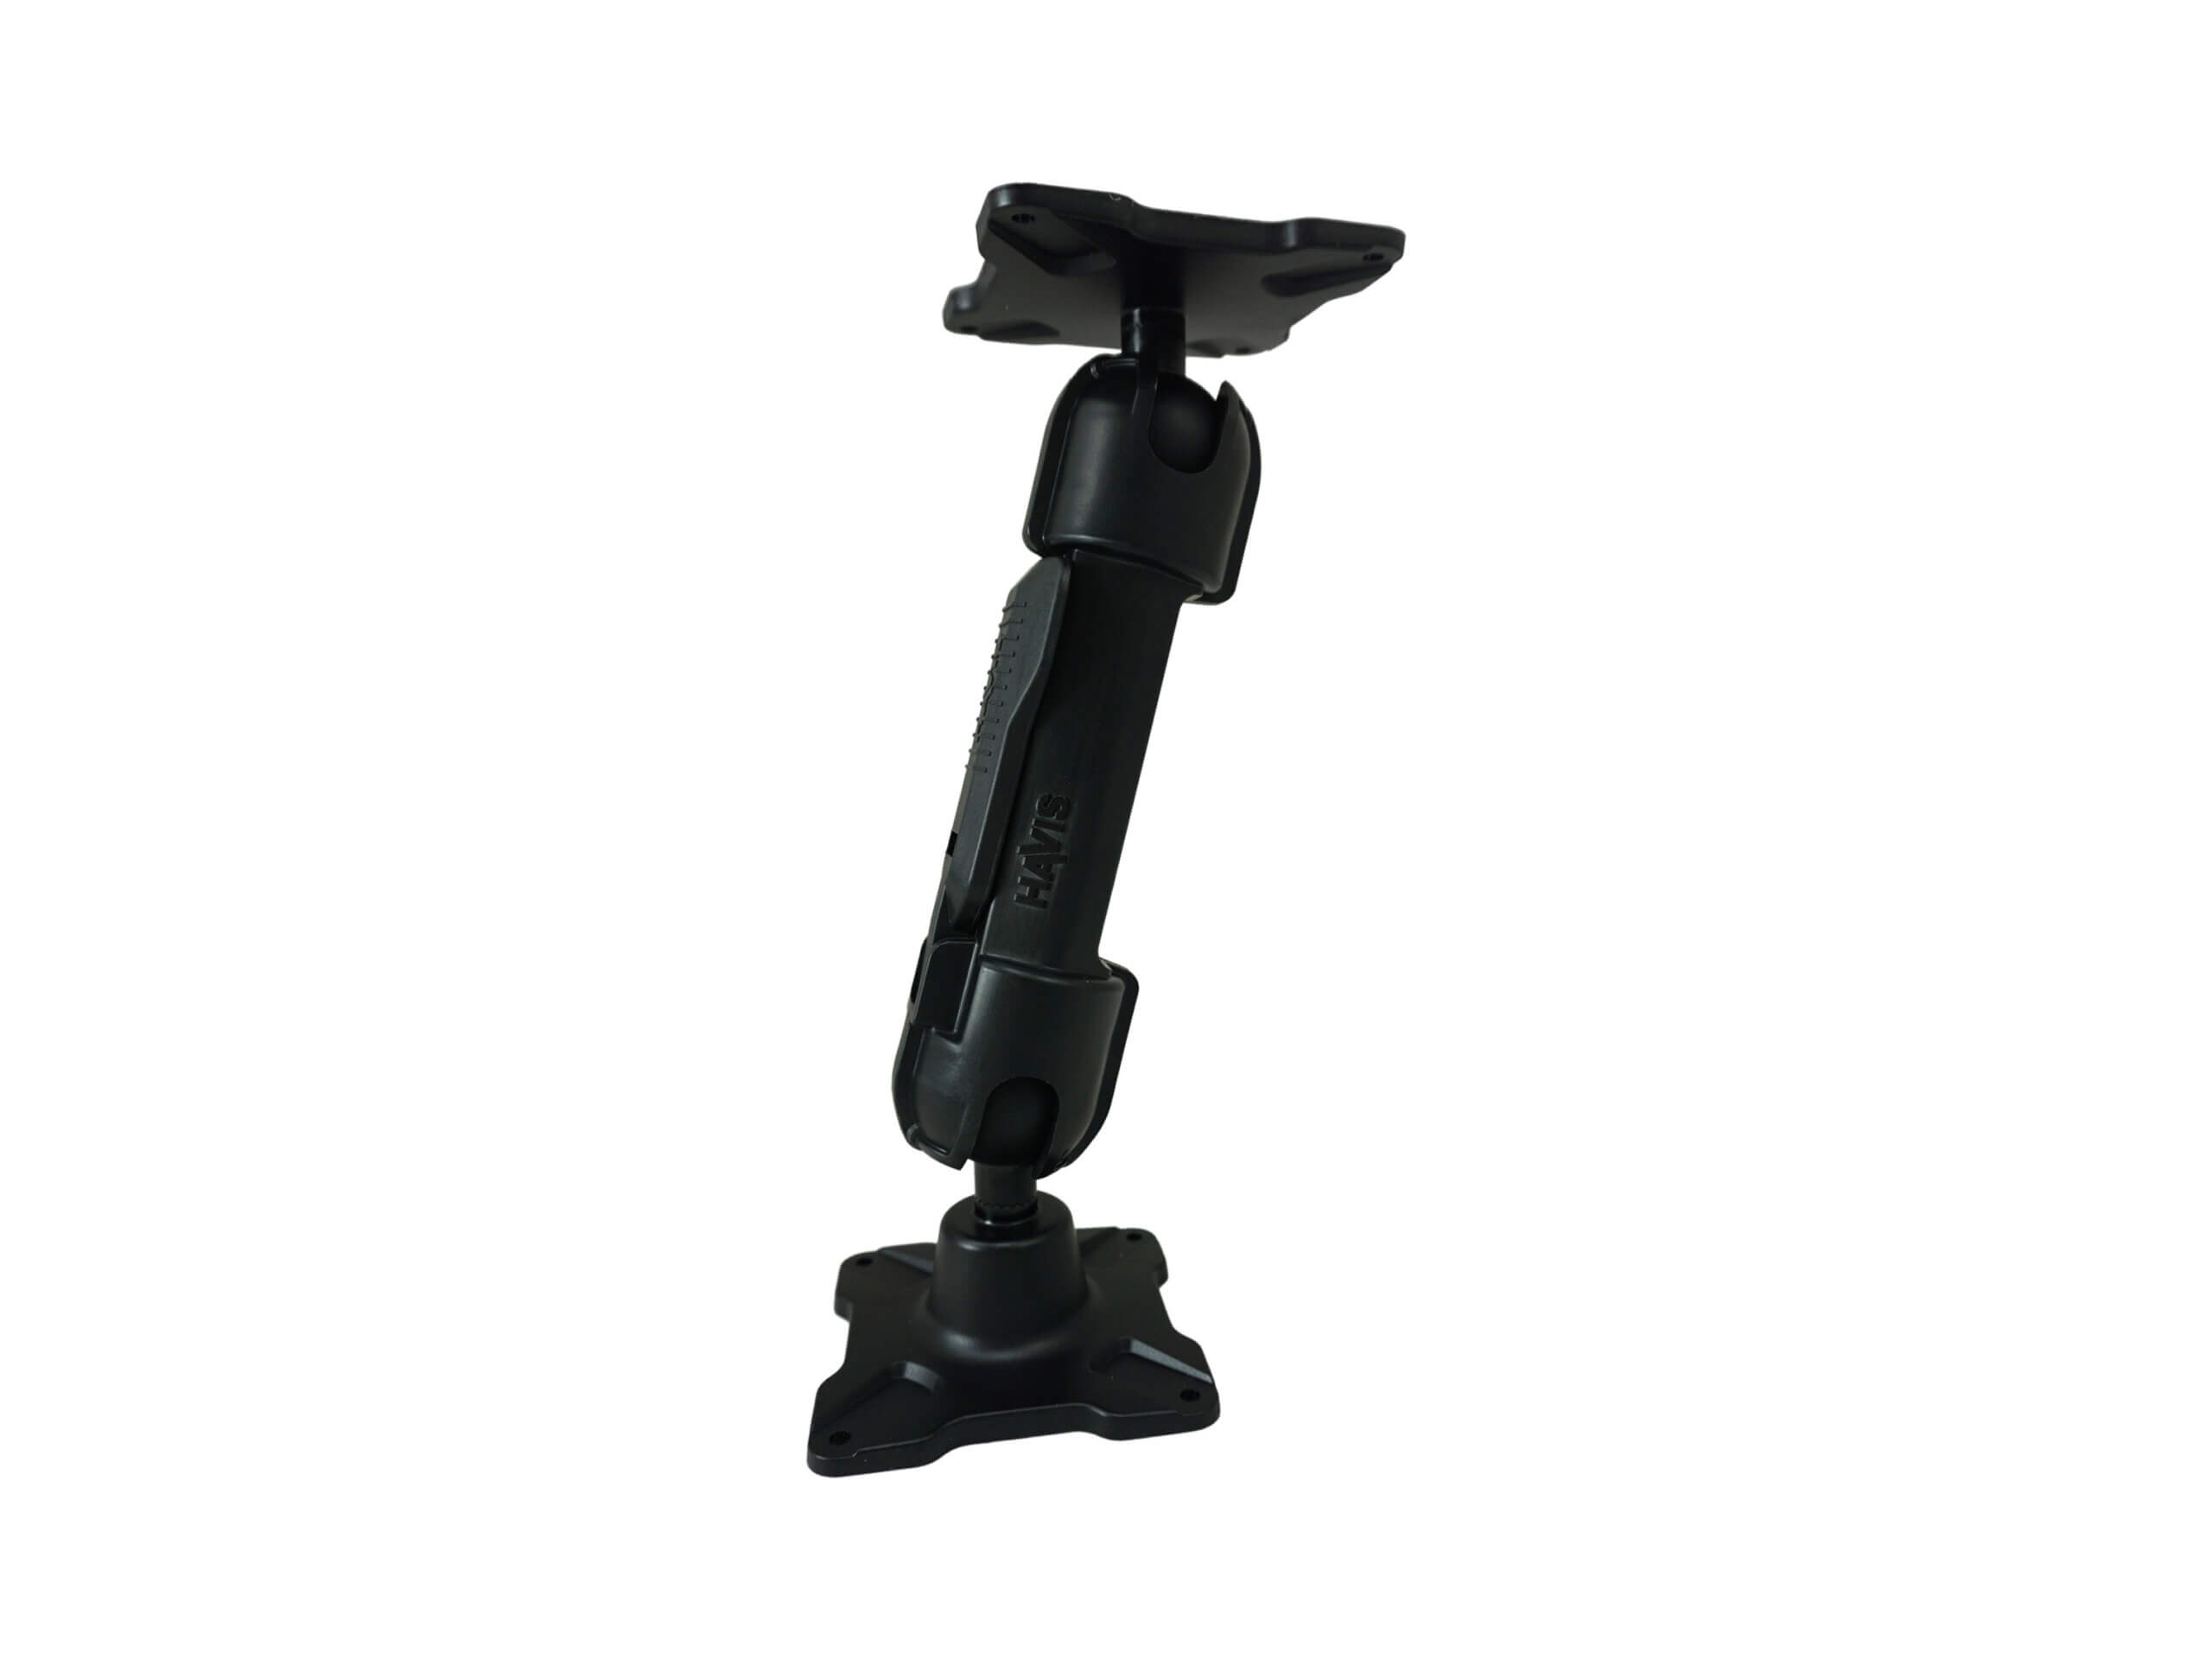 Dual Ball Mount with 1.50″ Clamp-Style Long Housing, One Standard VESA 75 Plate & One Long VESA 75 Plate